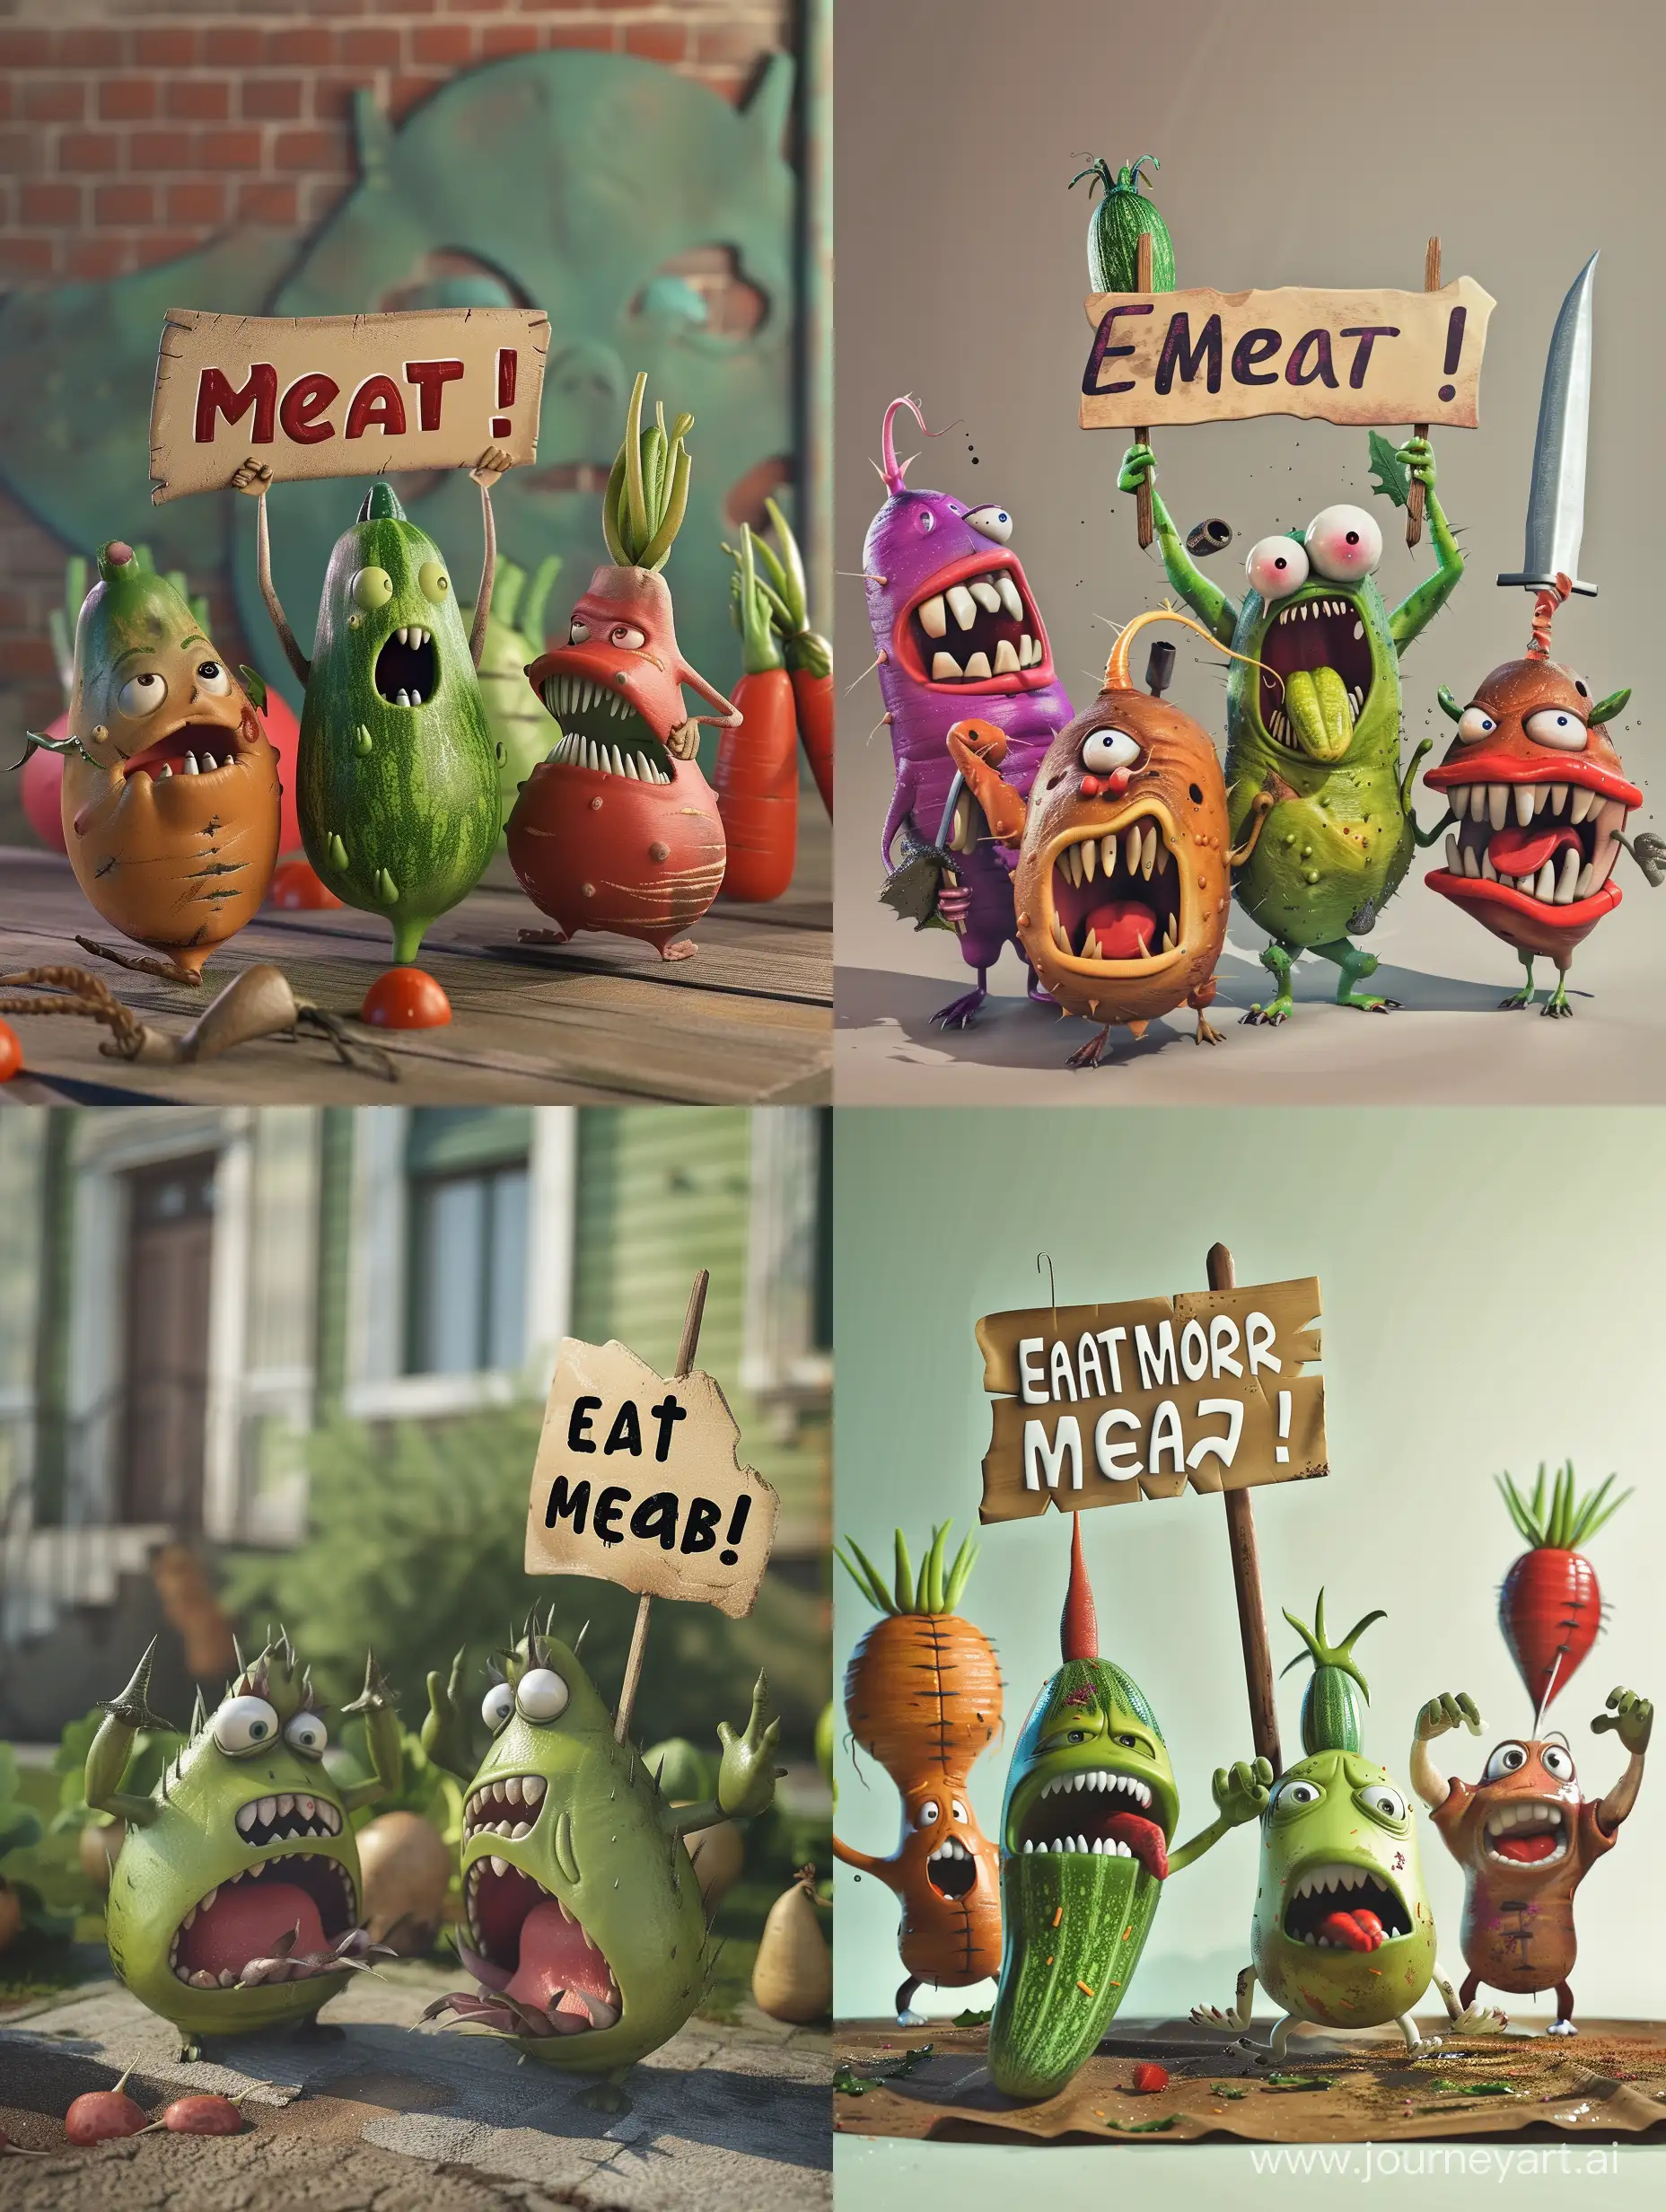 realistic angry vegetables holding a sign "Eat more Meat!", in the pixar style Meat!